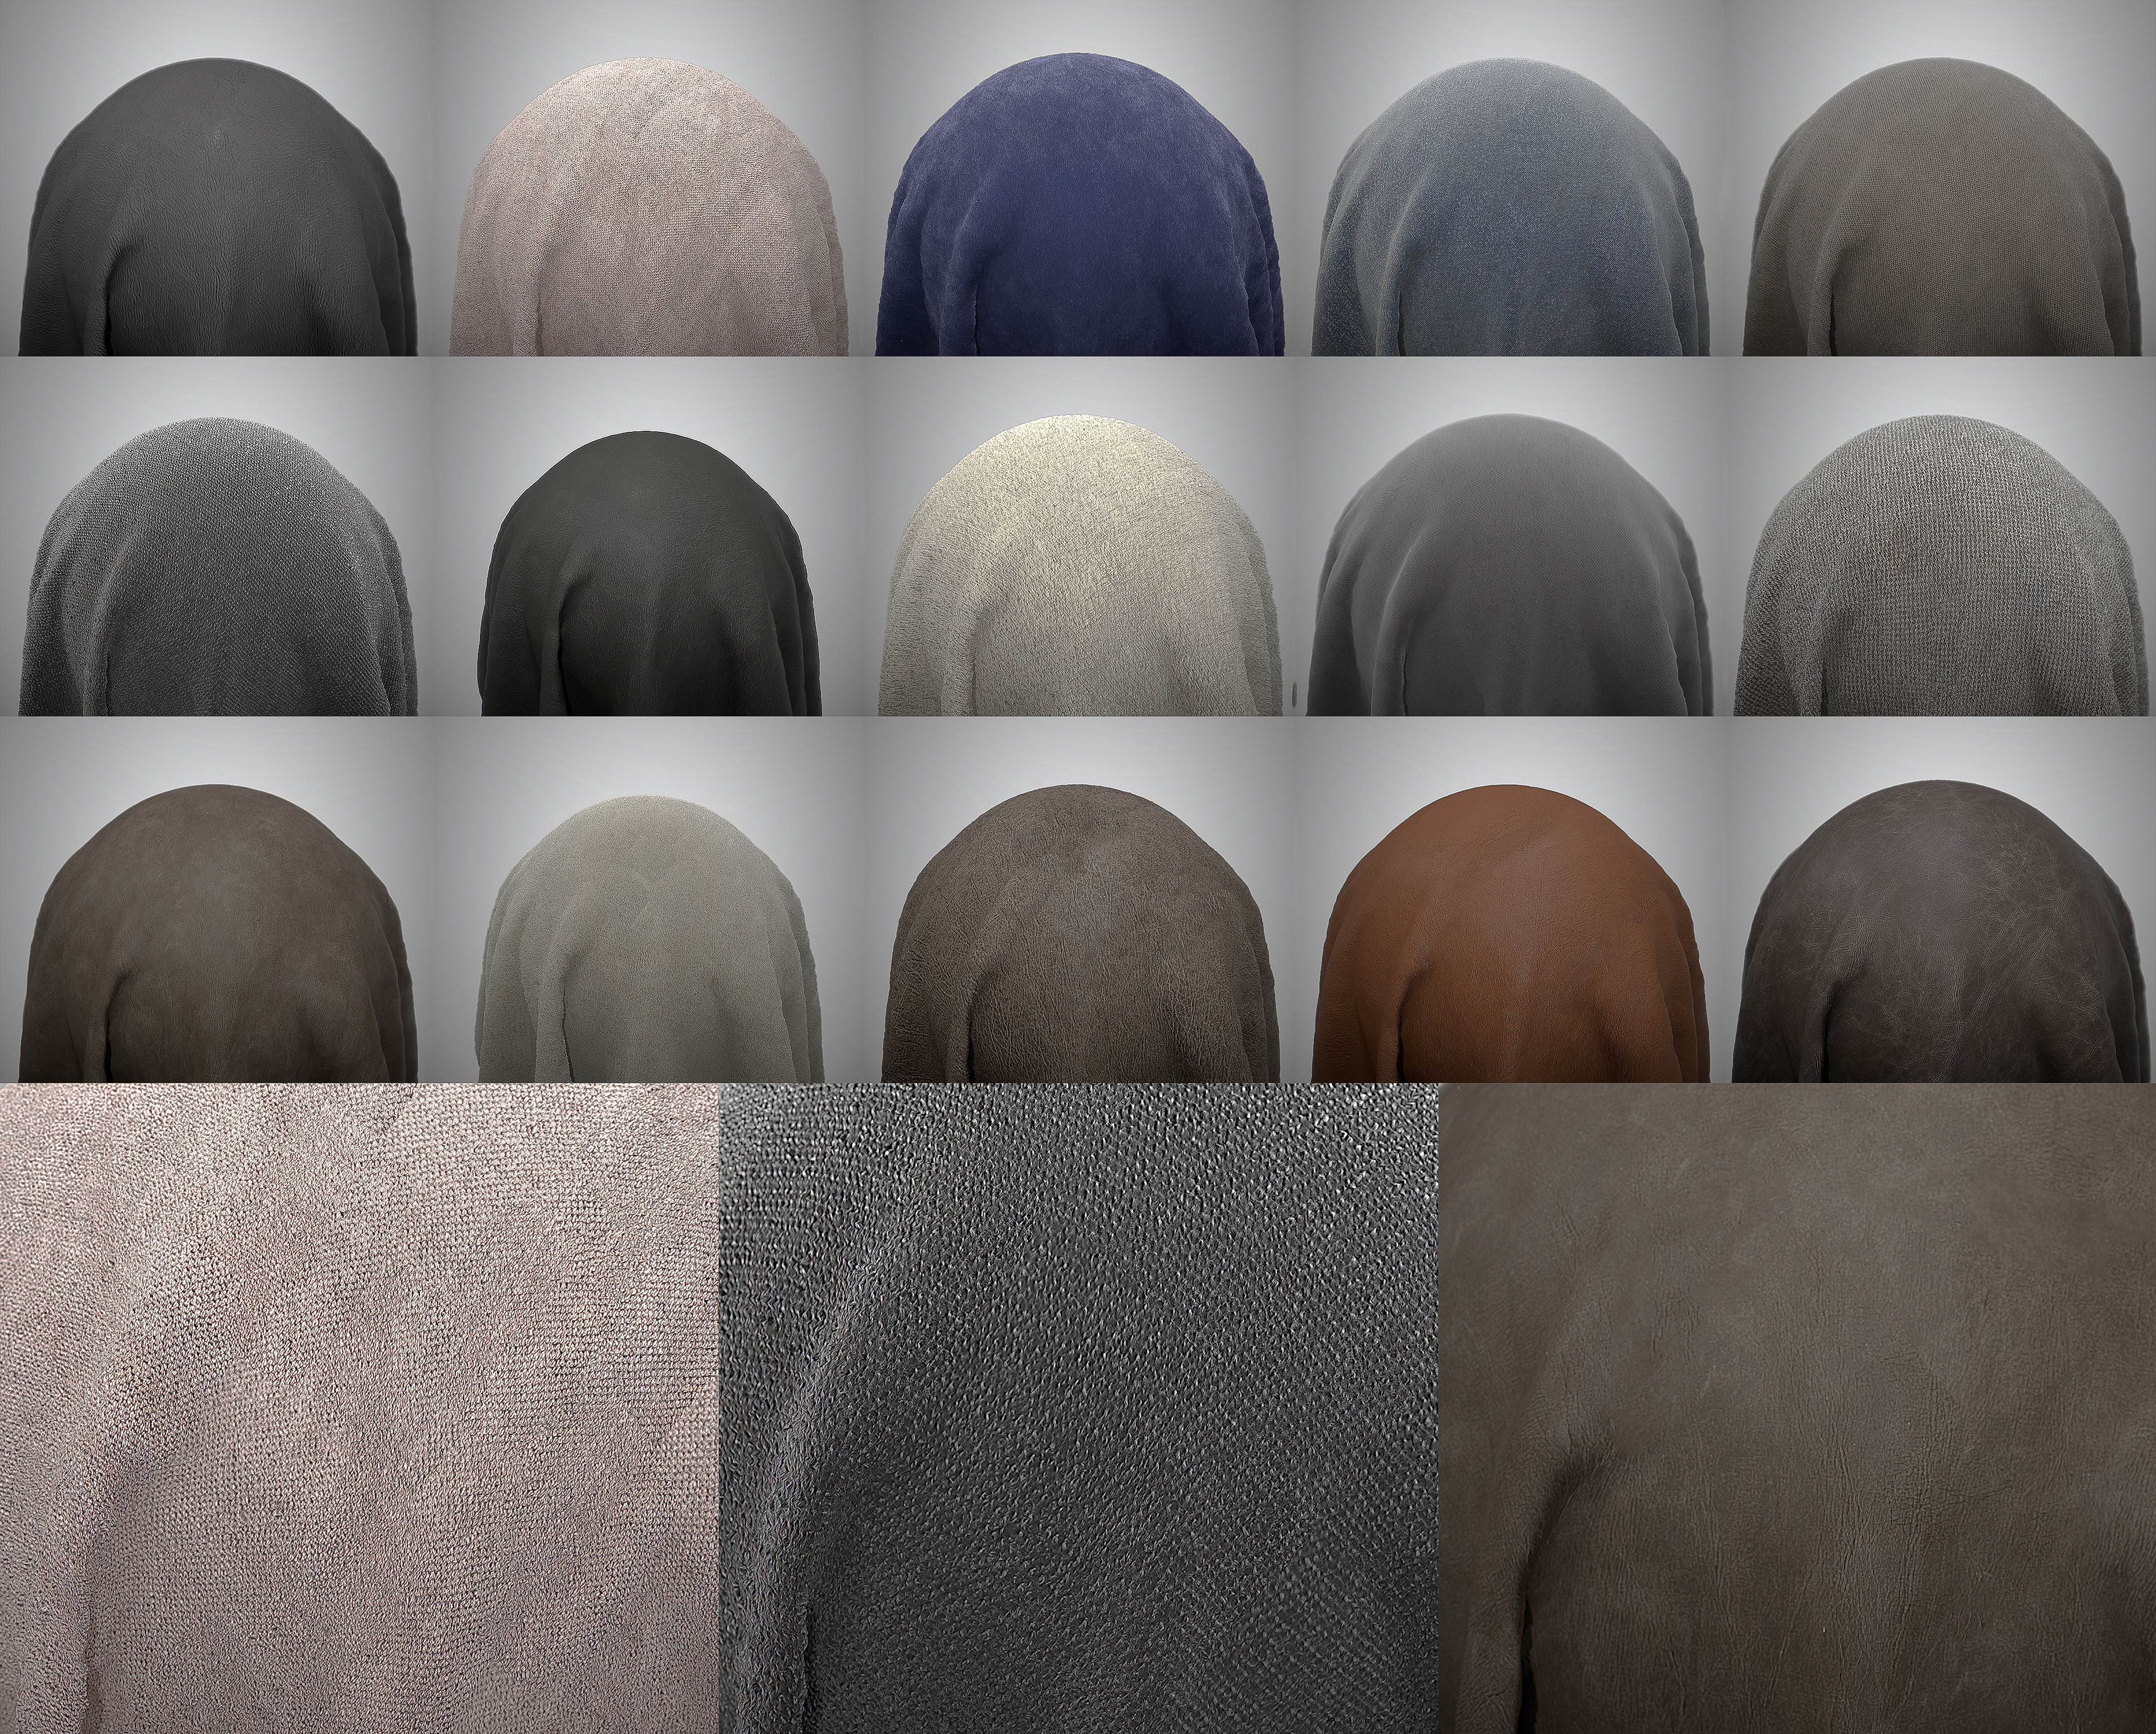 Various Fabric Substance Materials produced through the "Scan Process" Photo Stereo Scanning pipeline.